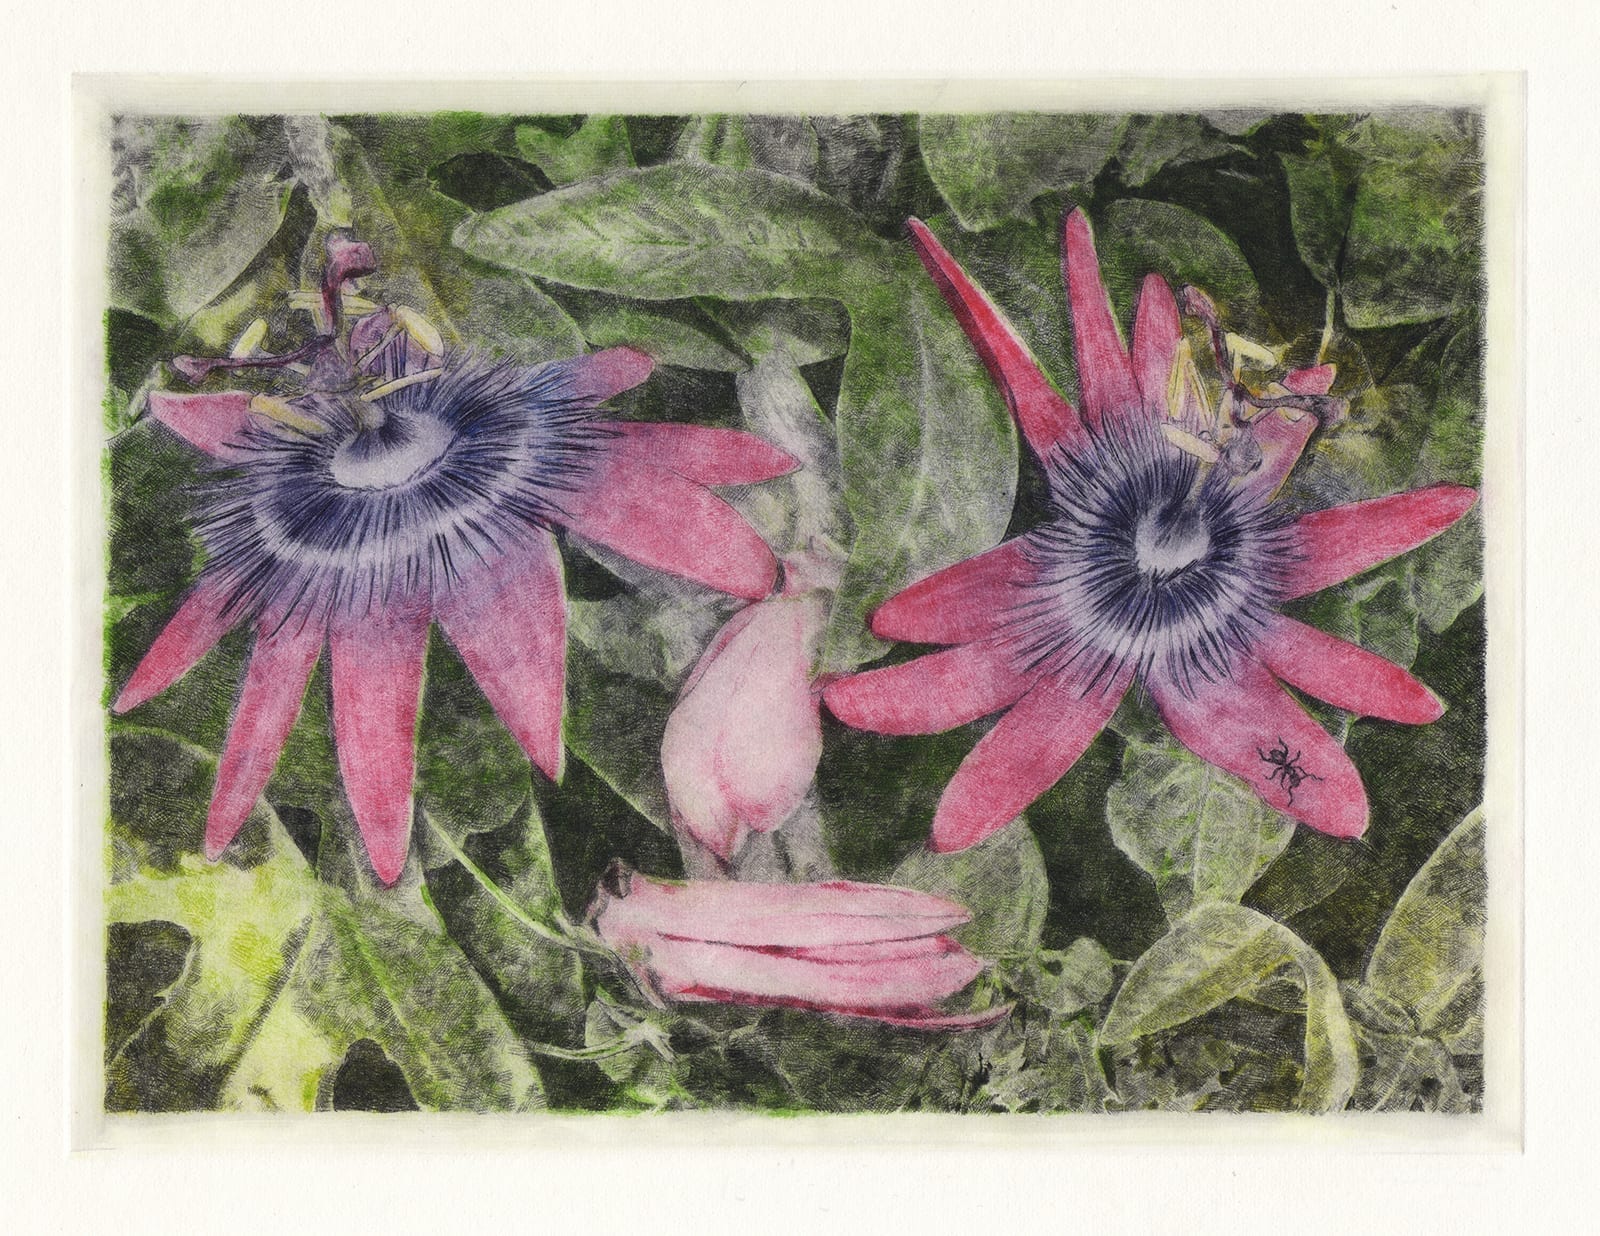 Laughing flowers: Passion flower (drypoint etching by Yaemi Shigyo)